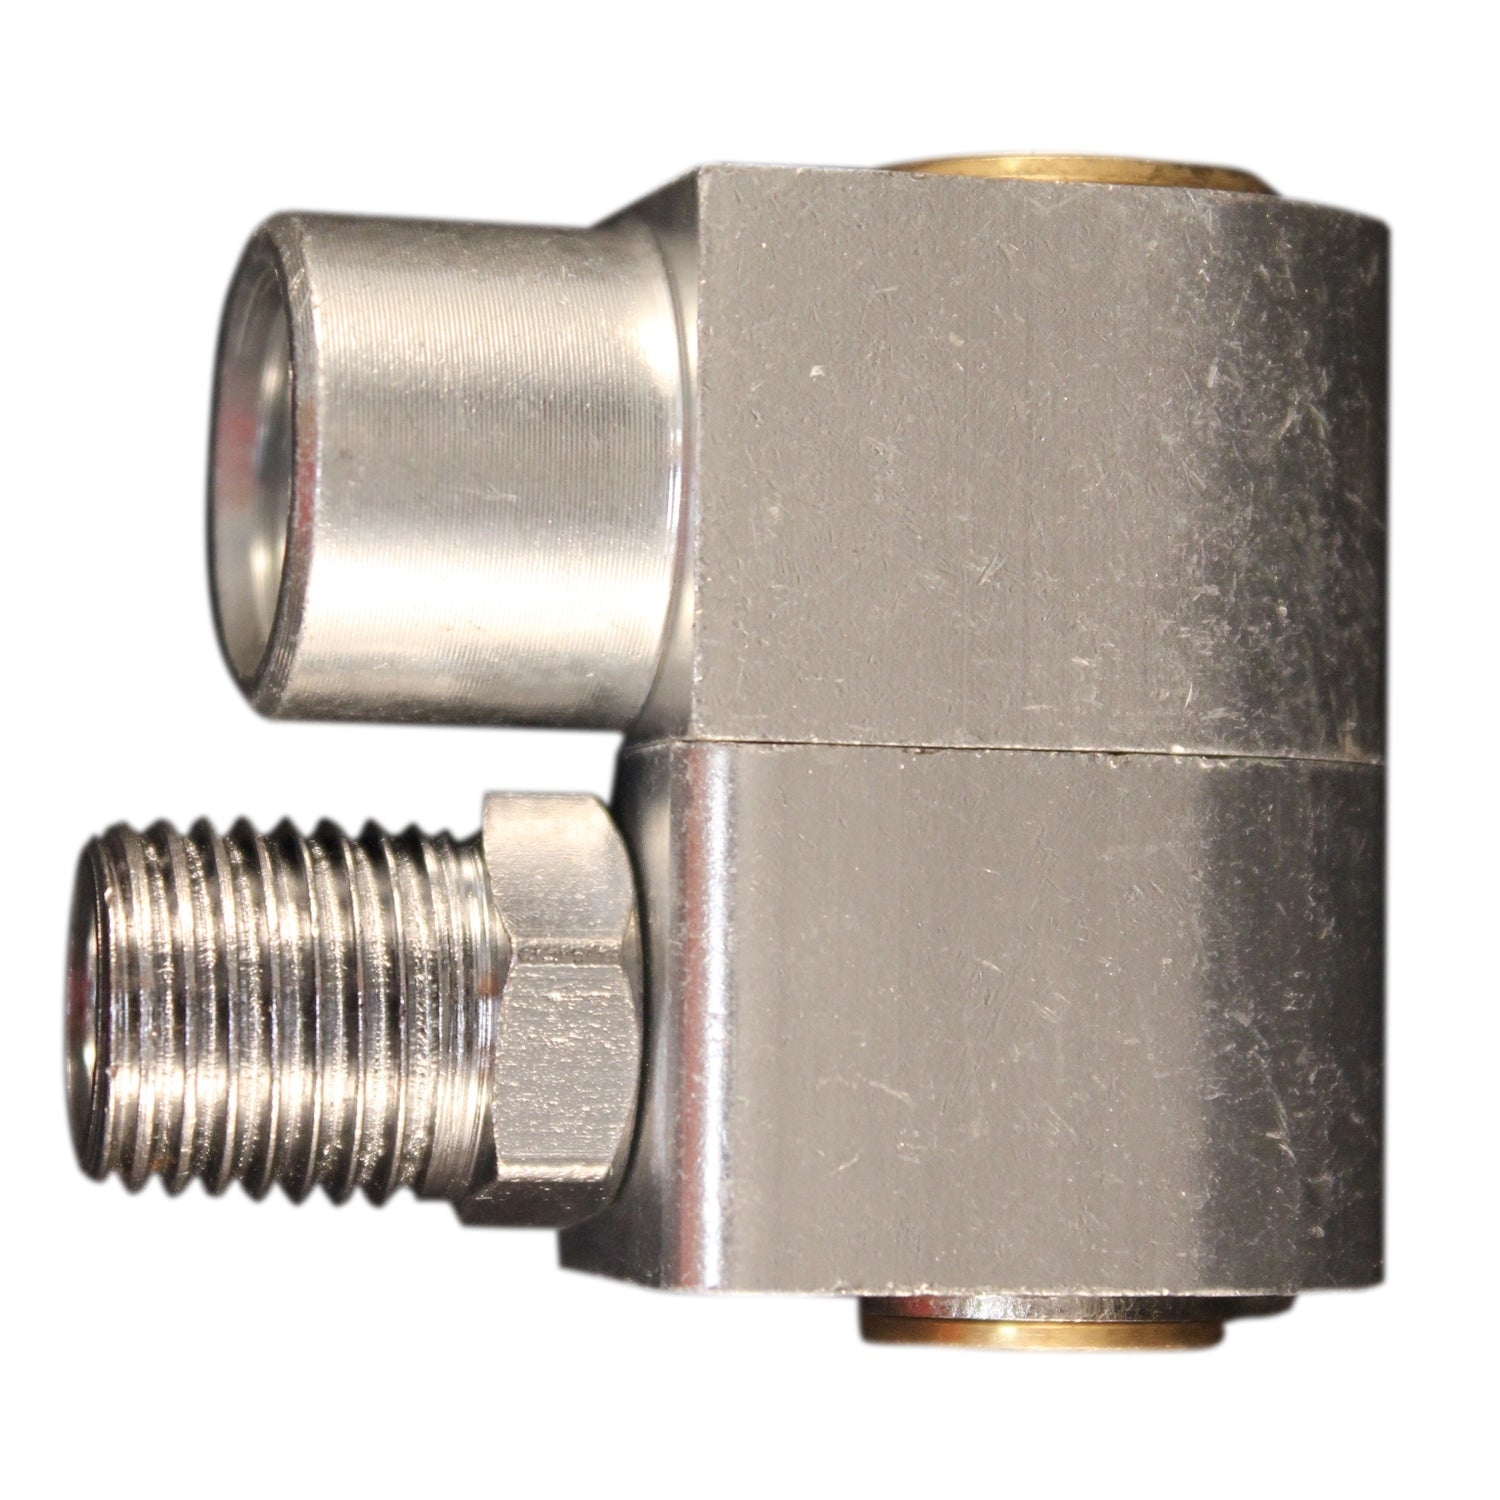 Reusable Air Hose Fitting, Swivel Body Adapter, 3/8 x 3/8, 3/4